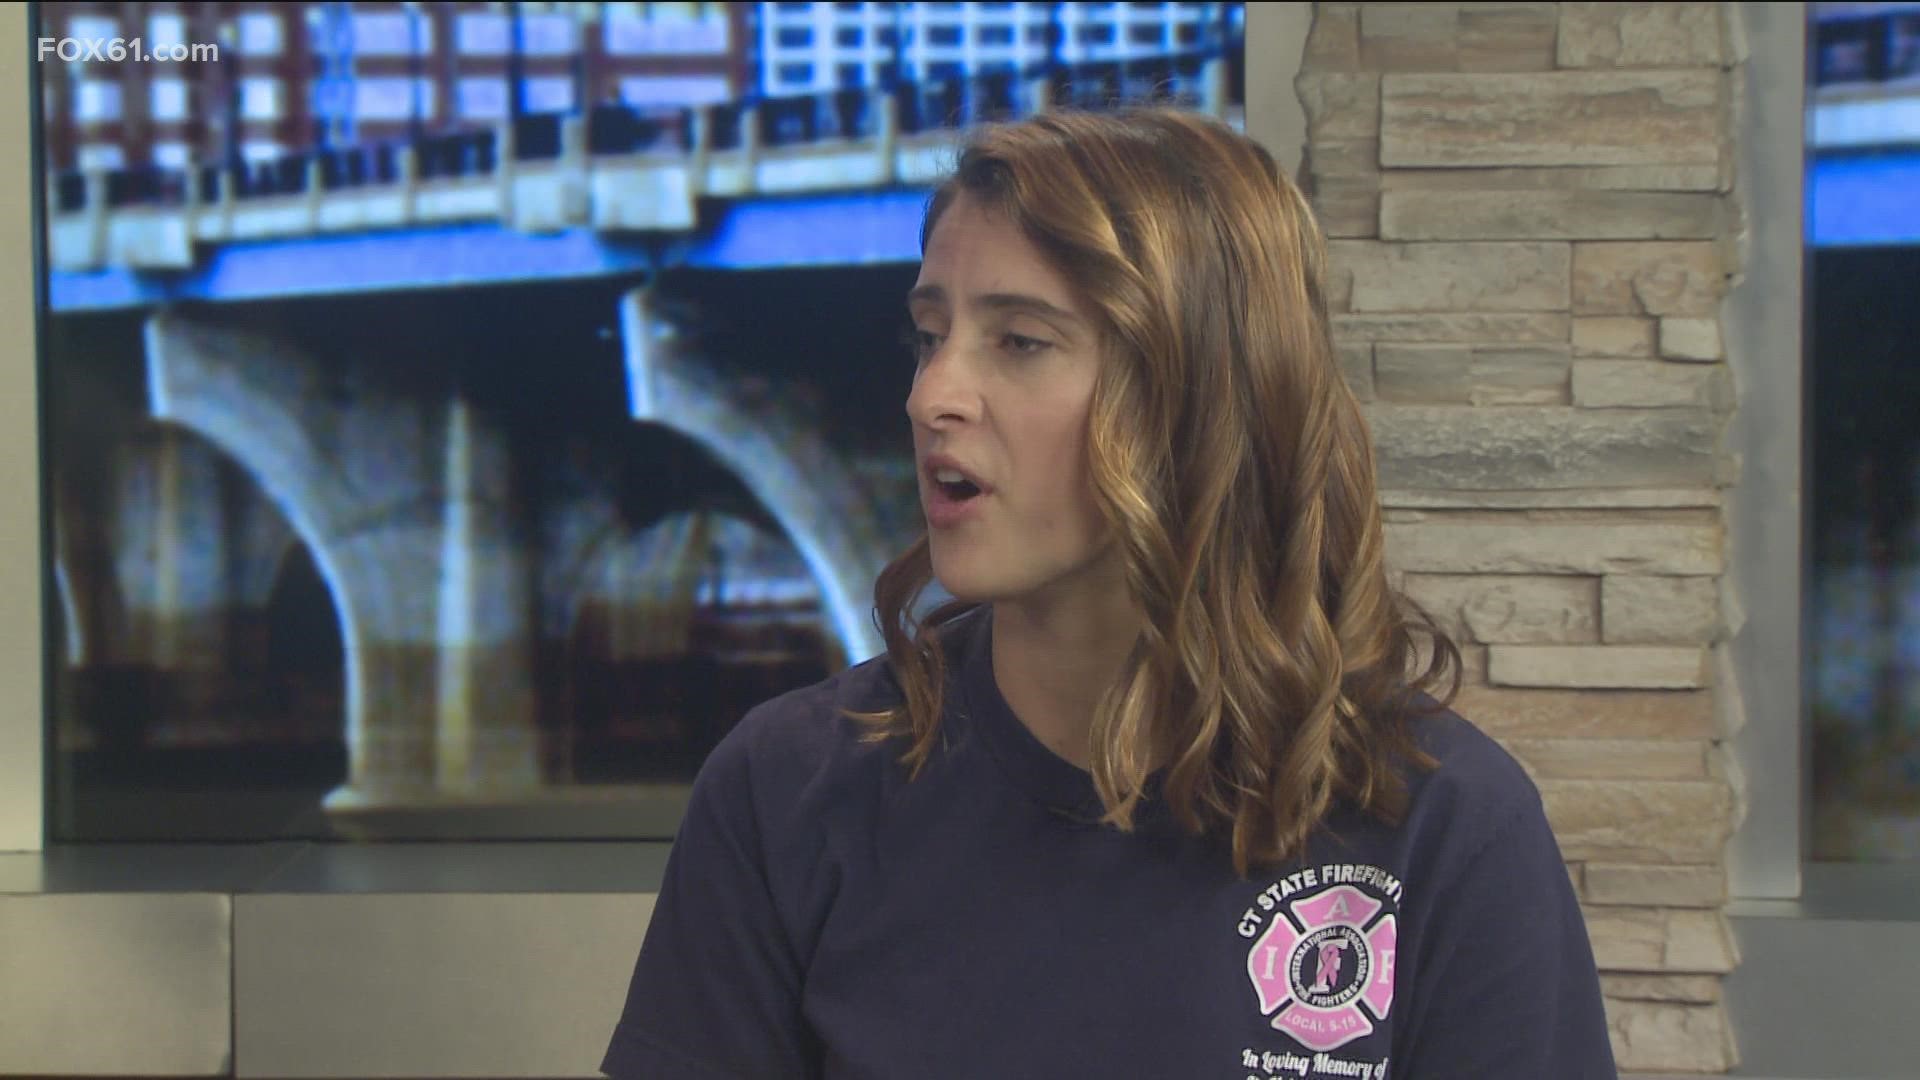 Anna Grudzinski, a firefighter at UConn fire department and member of the IAFF Local S-15 CT State Firefighters, shares pink t-shirts for breast cancer awareness.